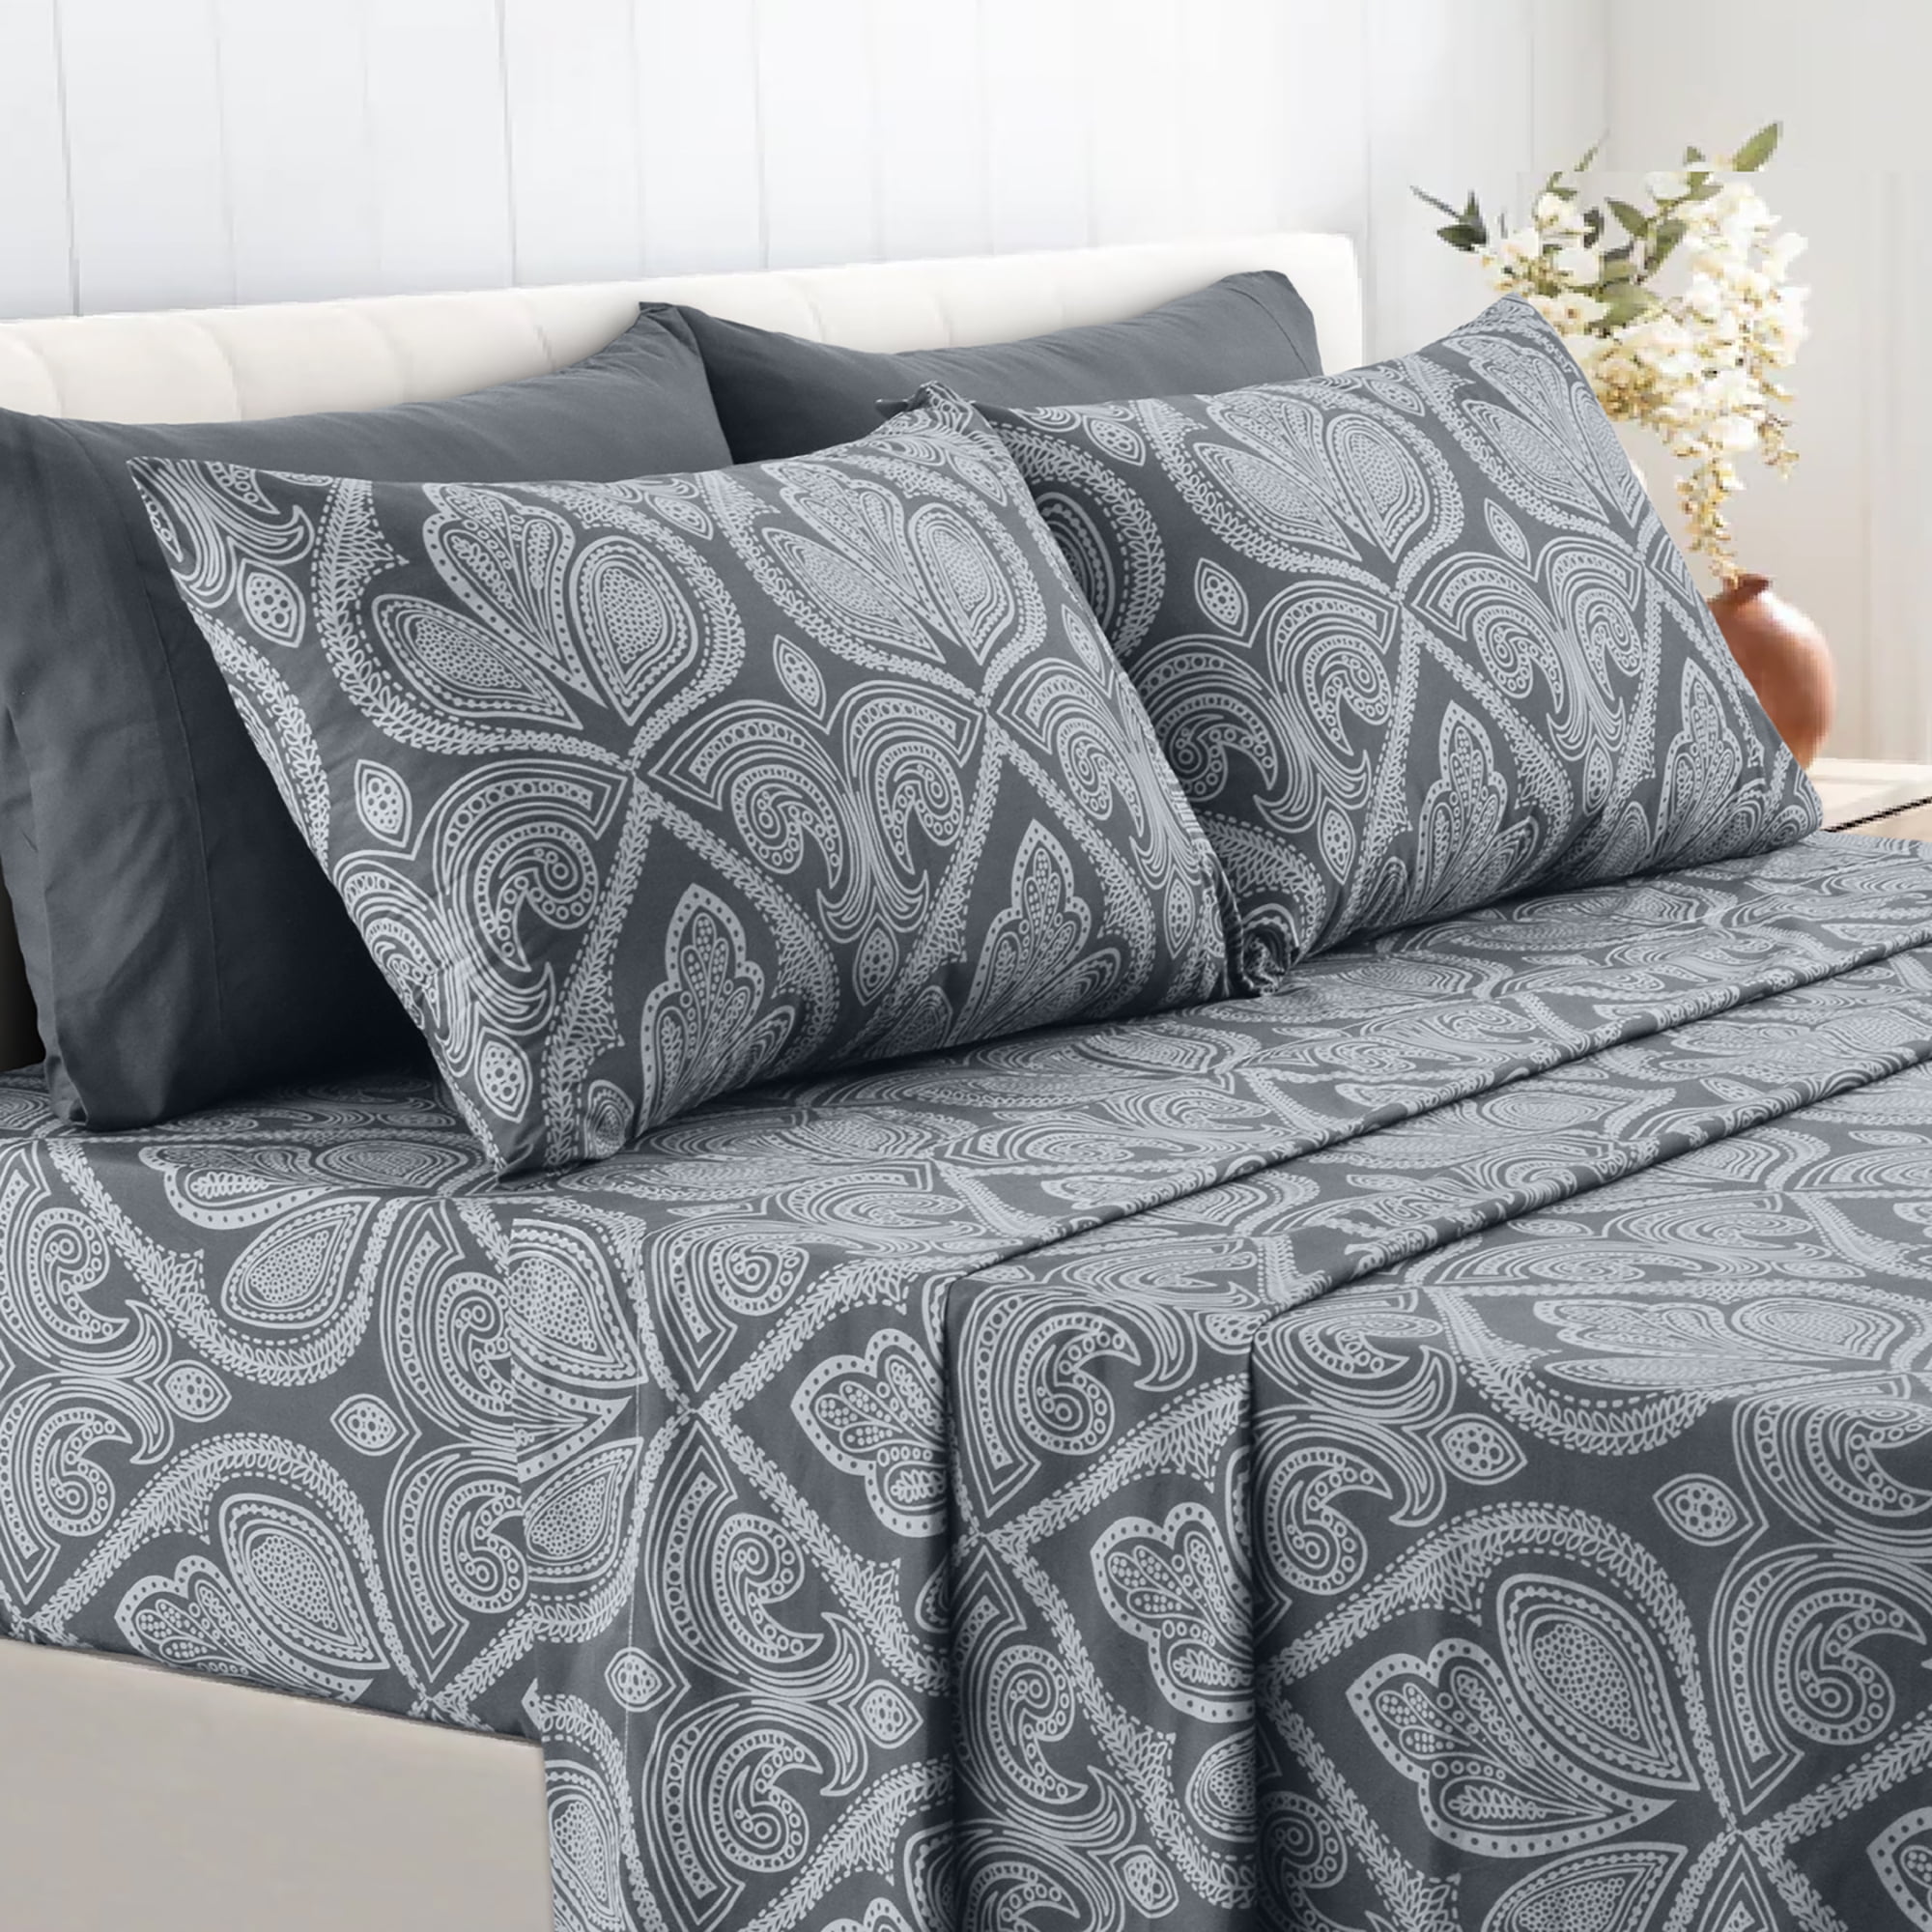 Details about   Mandala Love Fitted Sheet Cover with All-Round Elastic Pocket in 4 Sizes 